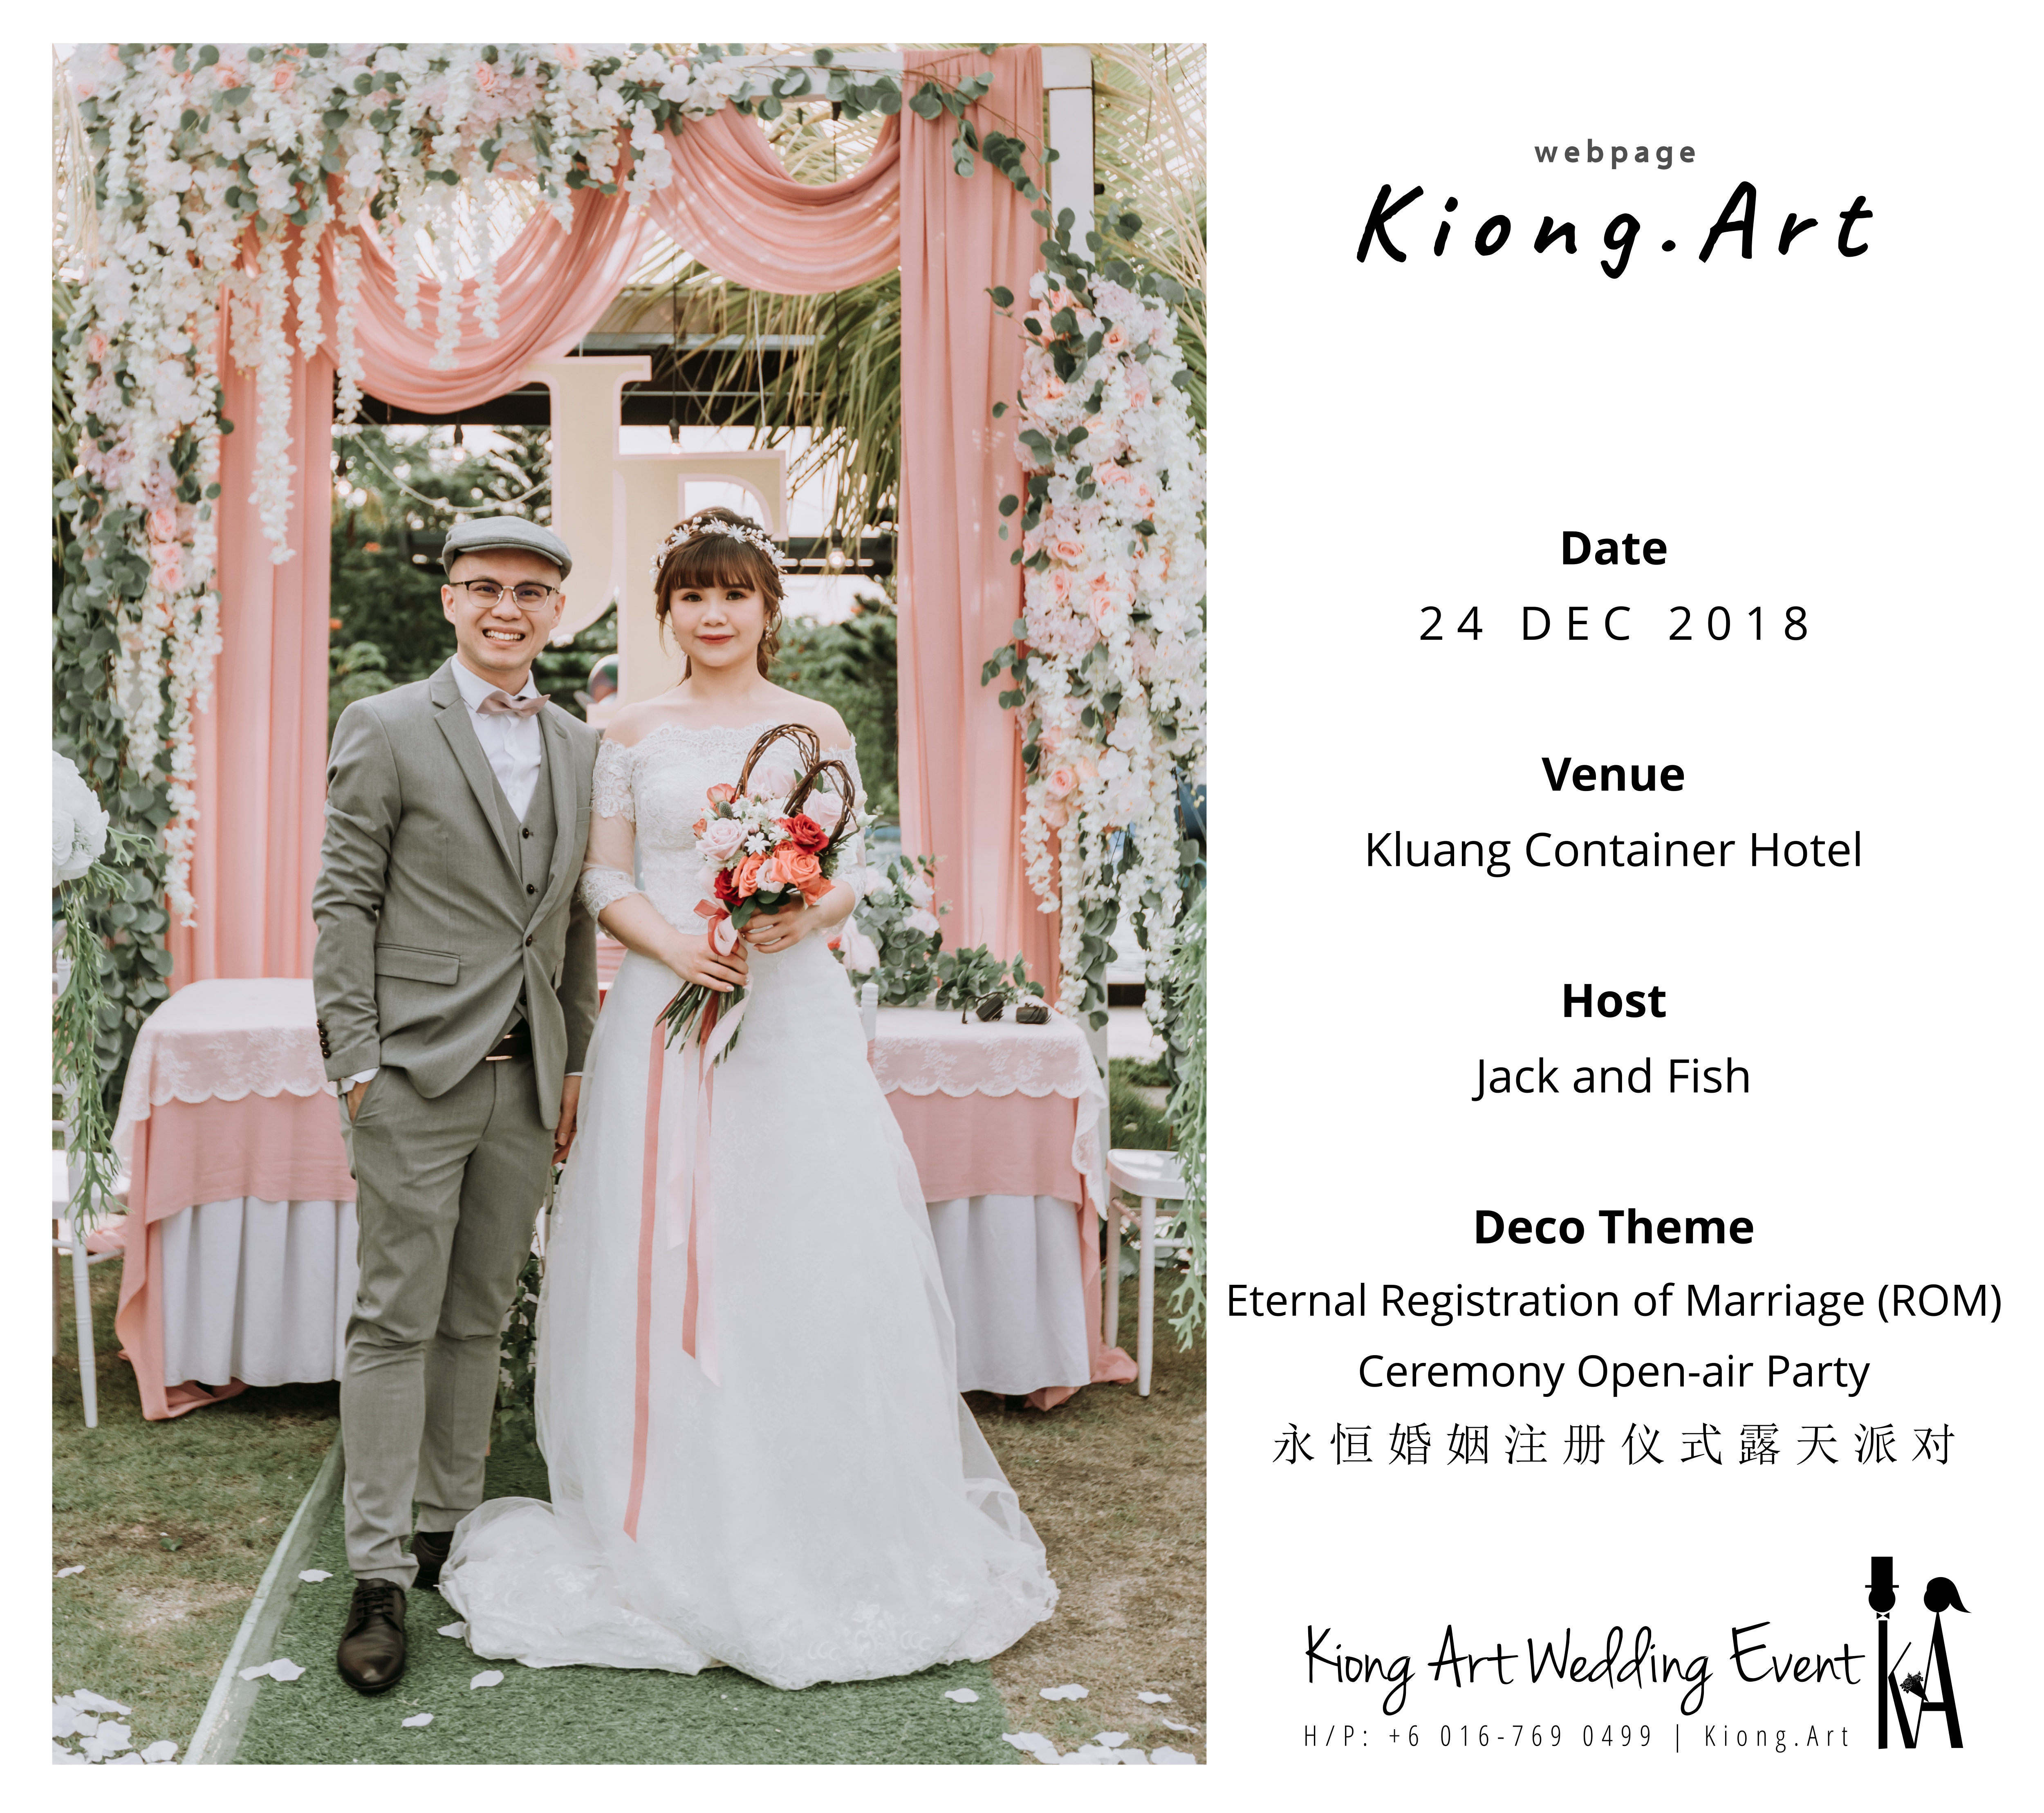 https://effye.co/wp-content/uploads/2019/05/malaysia-kuala-lumpur-wedding-decoration-kiong-art-wedding-deco-eternal-registration-of-marriage-ceremony-open-air-party-of-jack-and-fish-rom-at-kluang-container-hotel-a14-a00-03.jpg